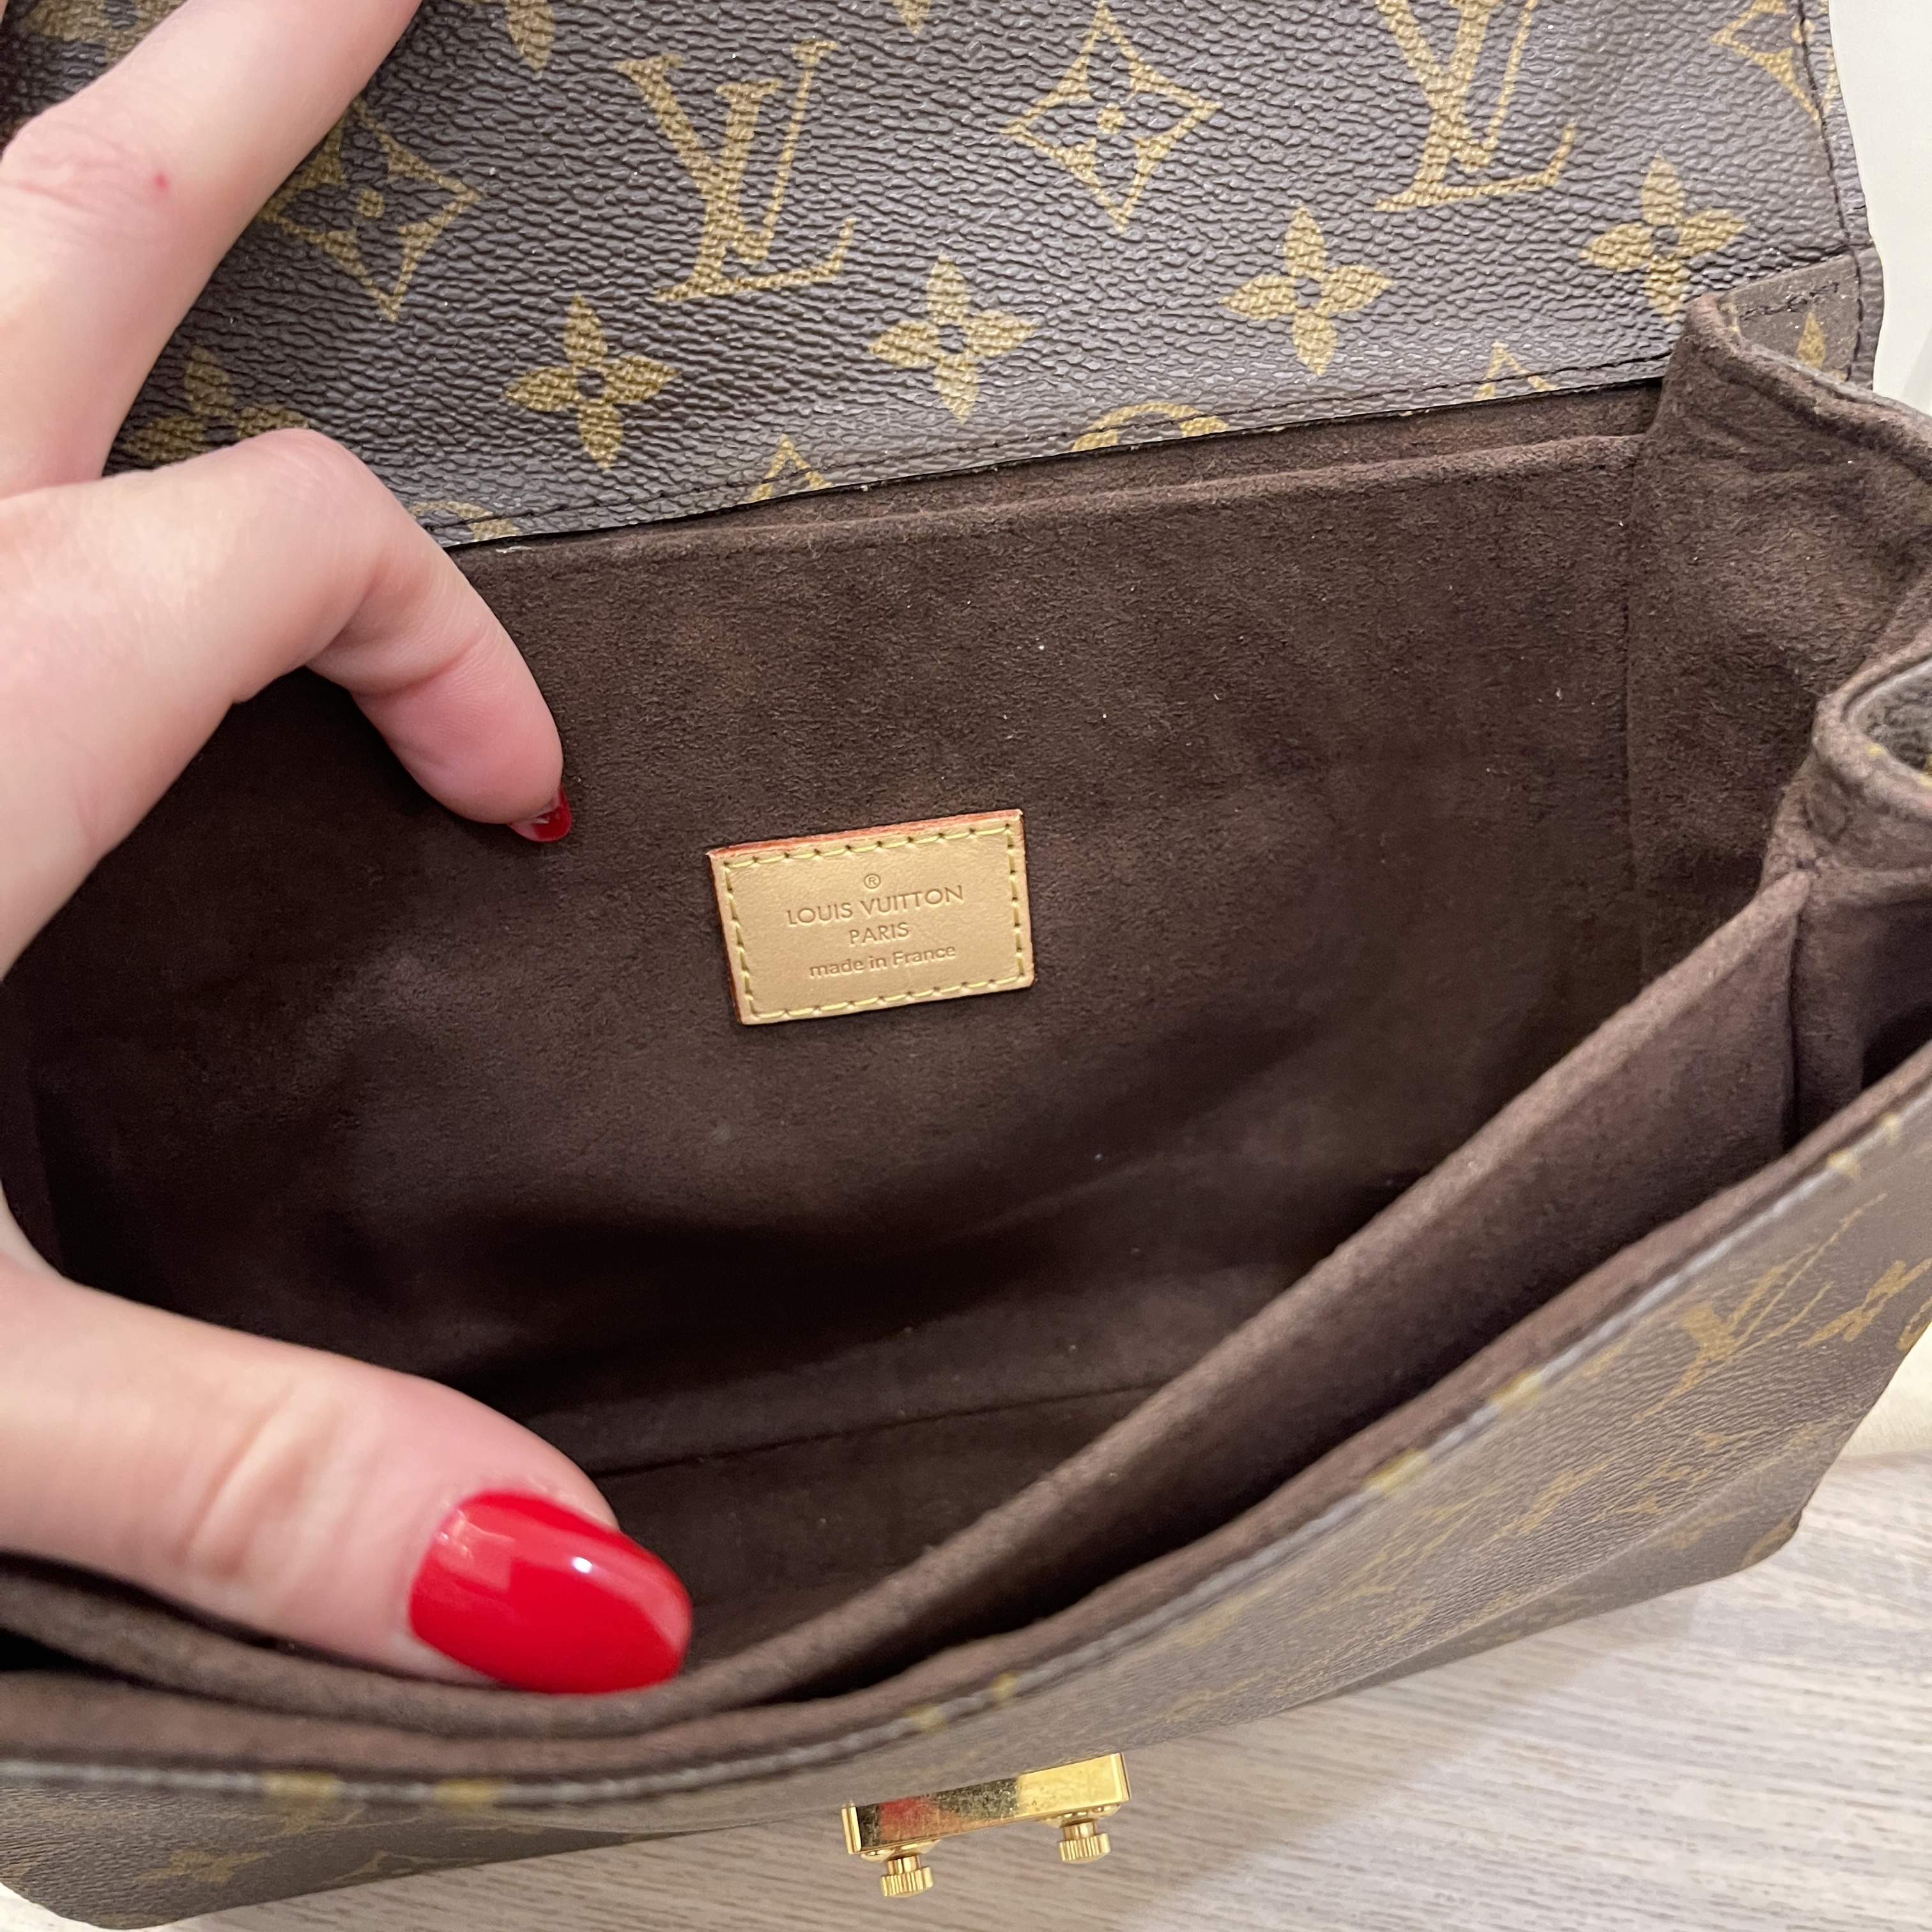 Wanting to buy a used Pochette metis or similar : r/Louisvuitton